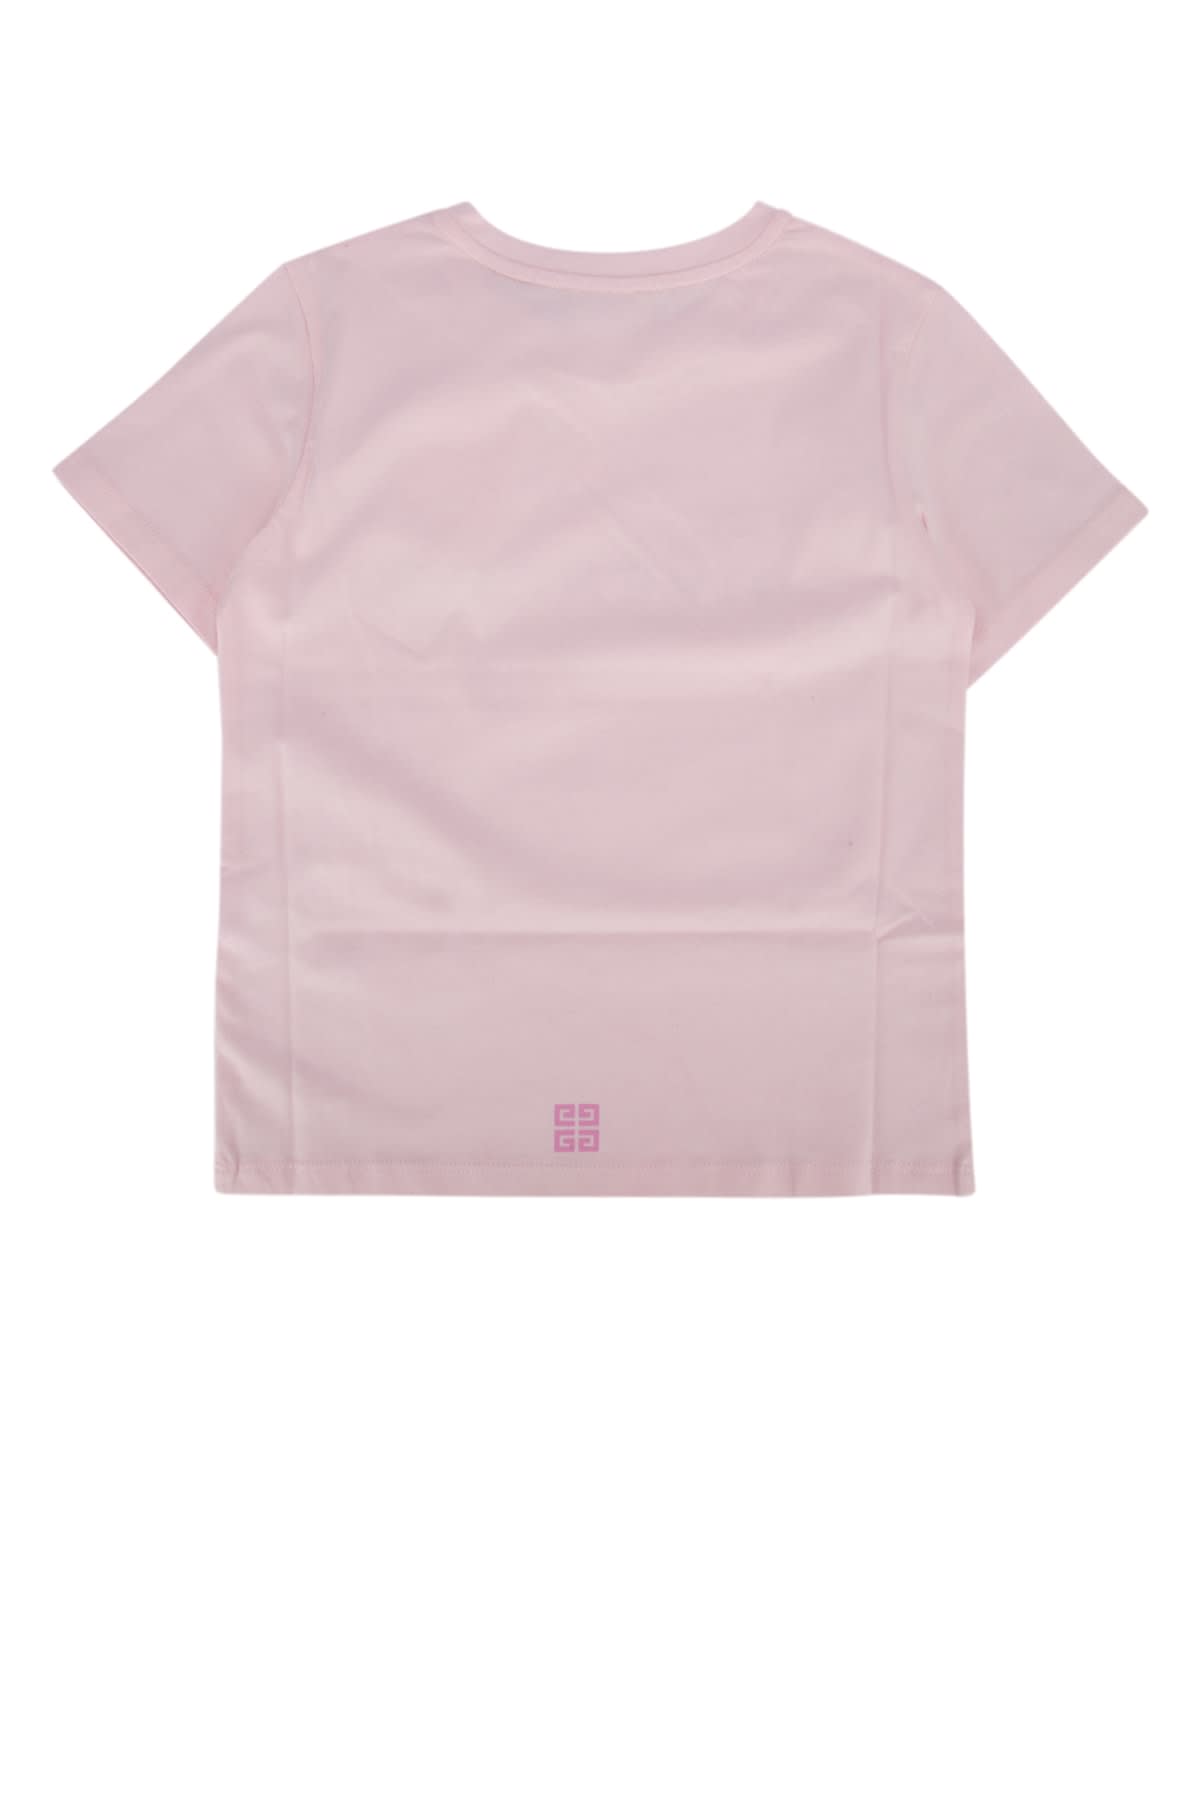 Givenchy Kids' T-shirt In Marshmallow